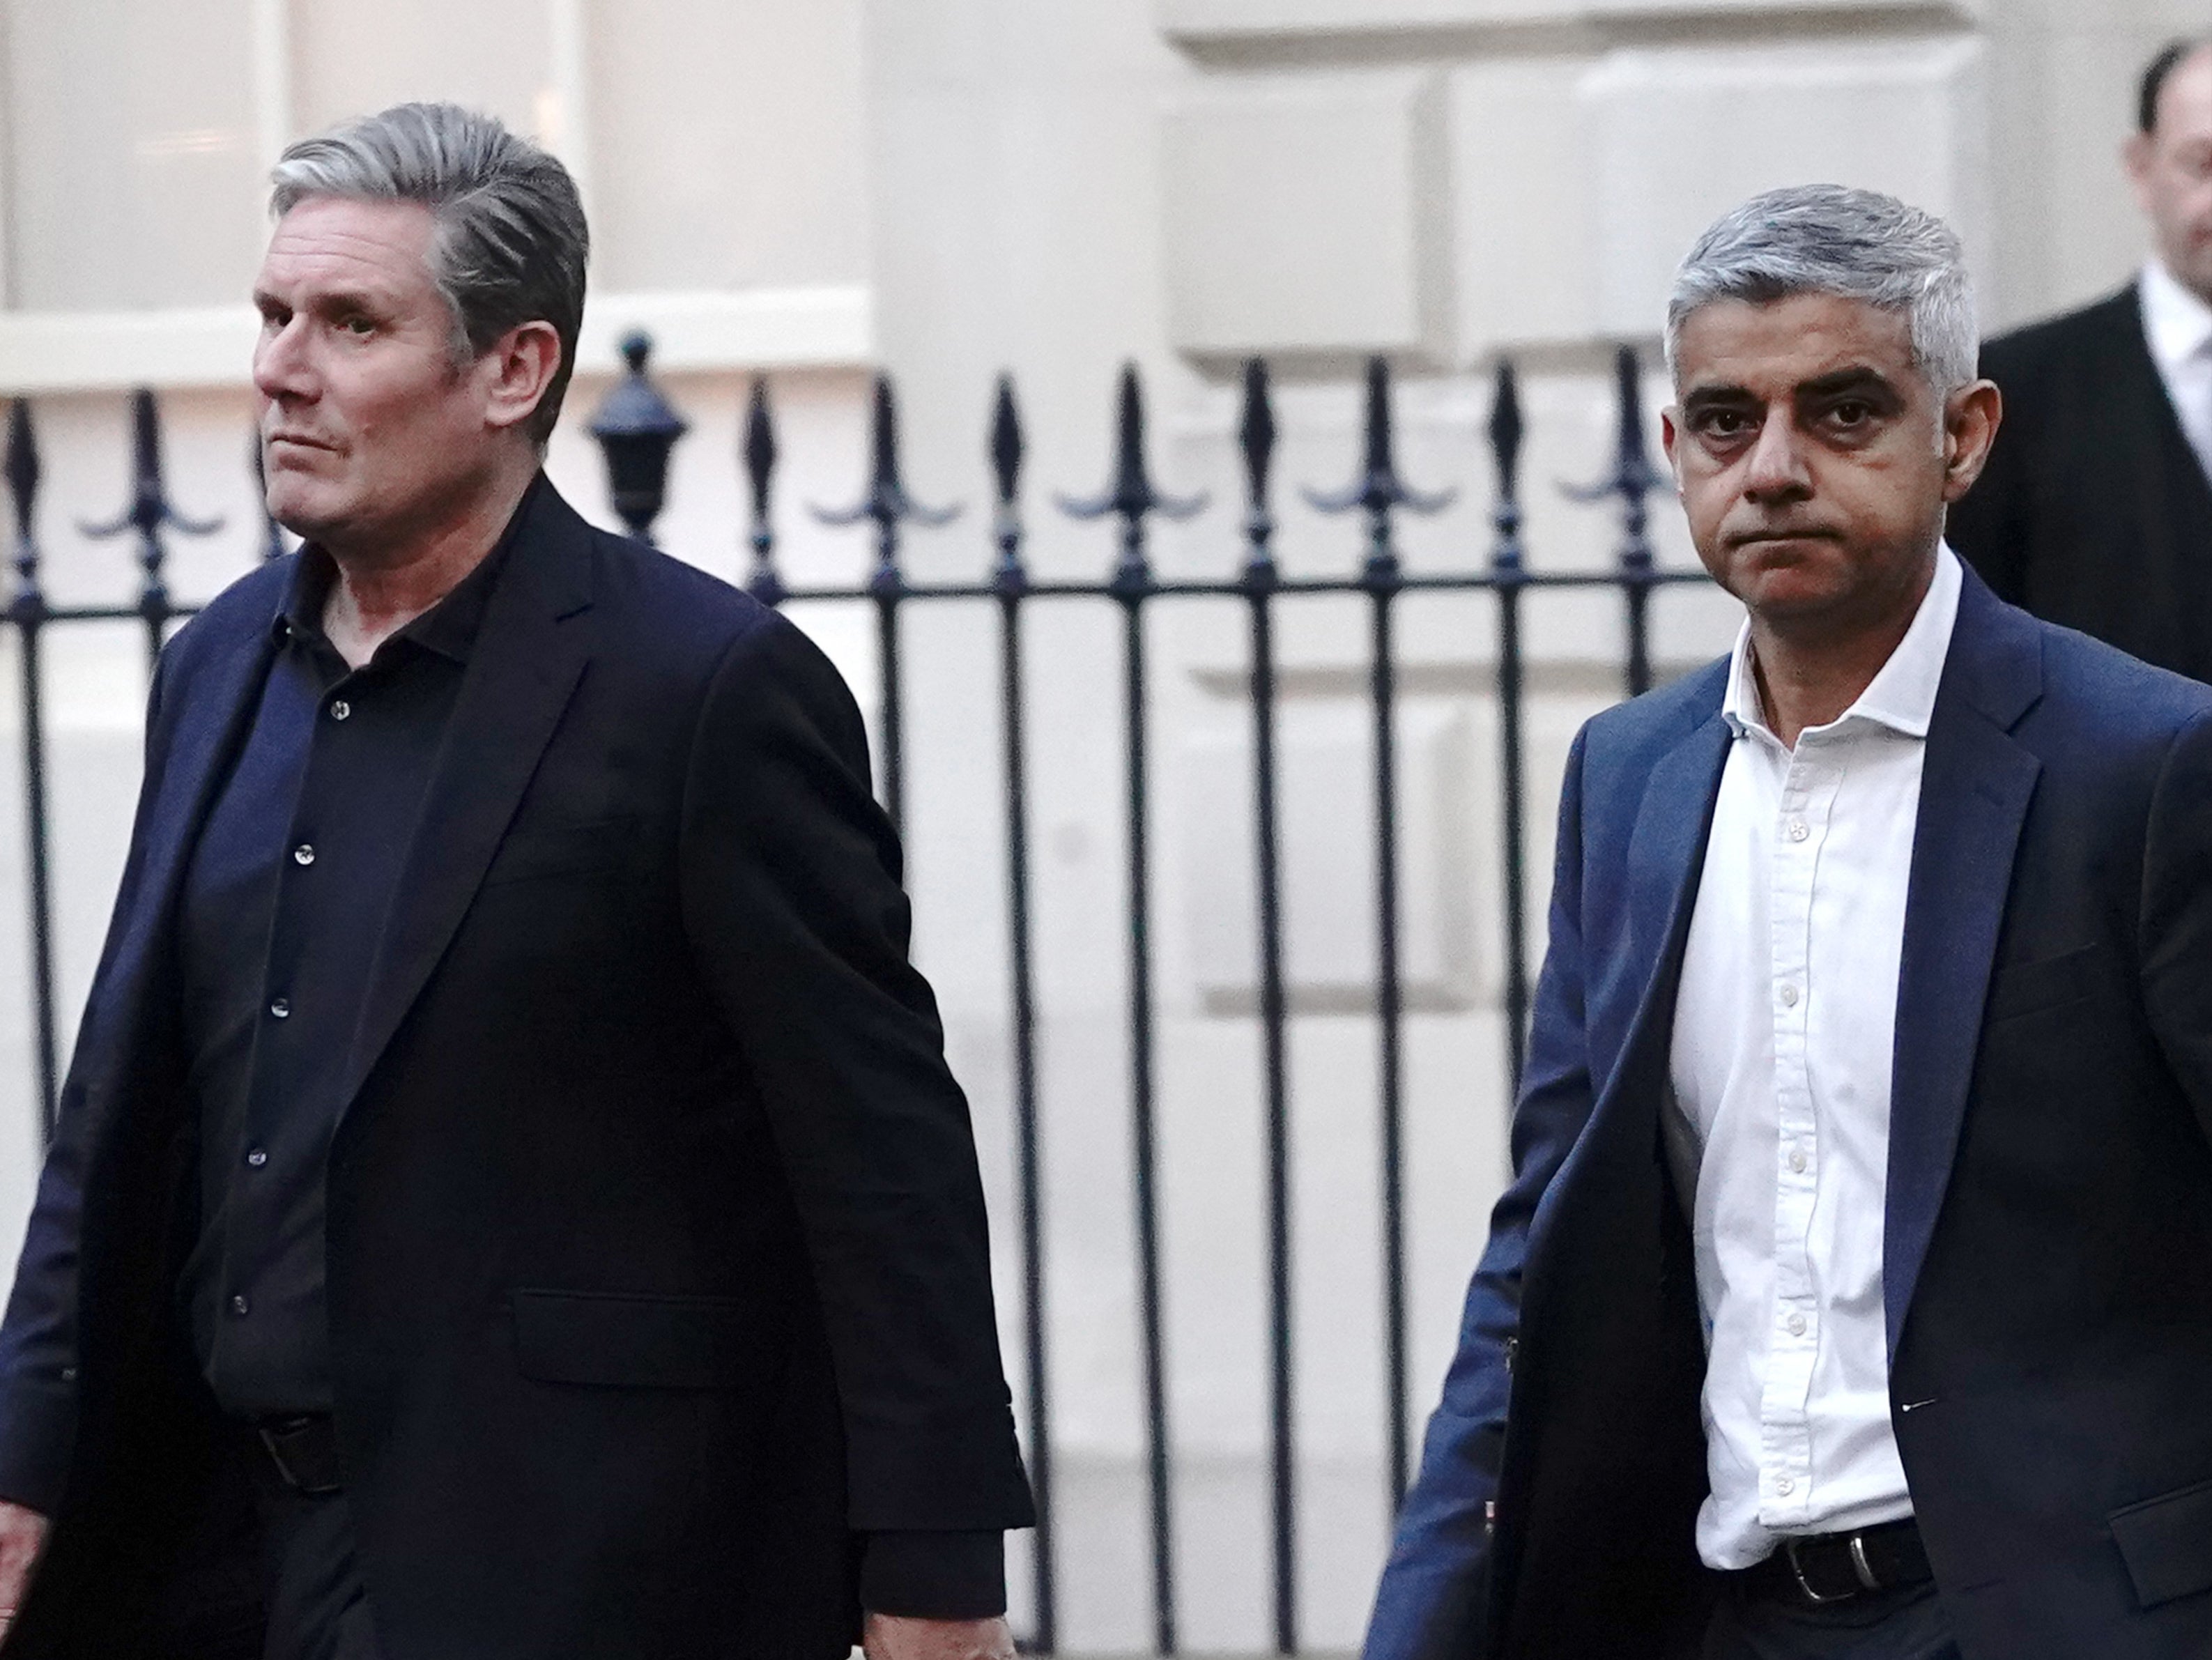 London mayor Sadiq Khan is the most senior Labour figure to call for an Israeli ceasefire, defying Keir Starmer’s party line